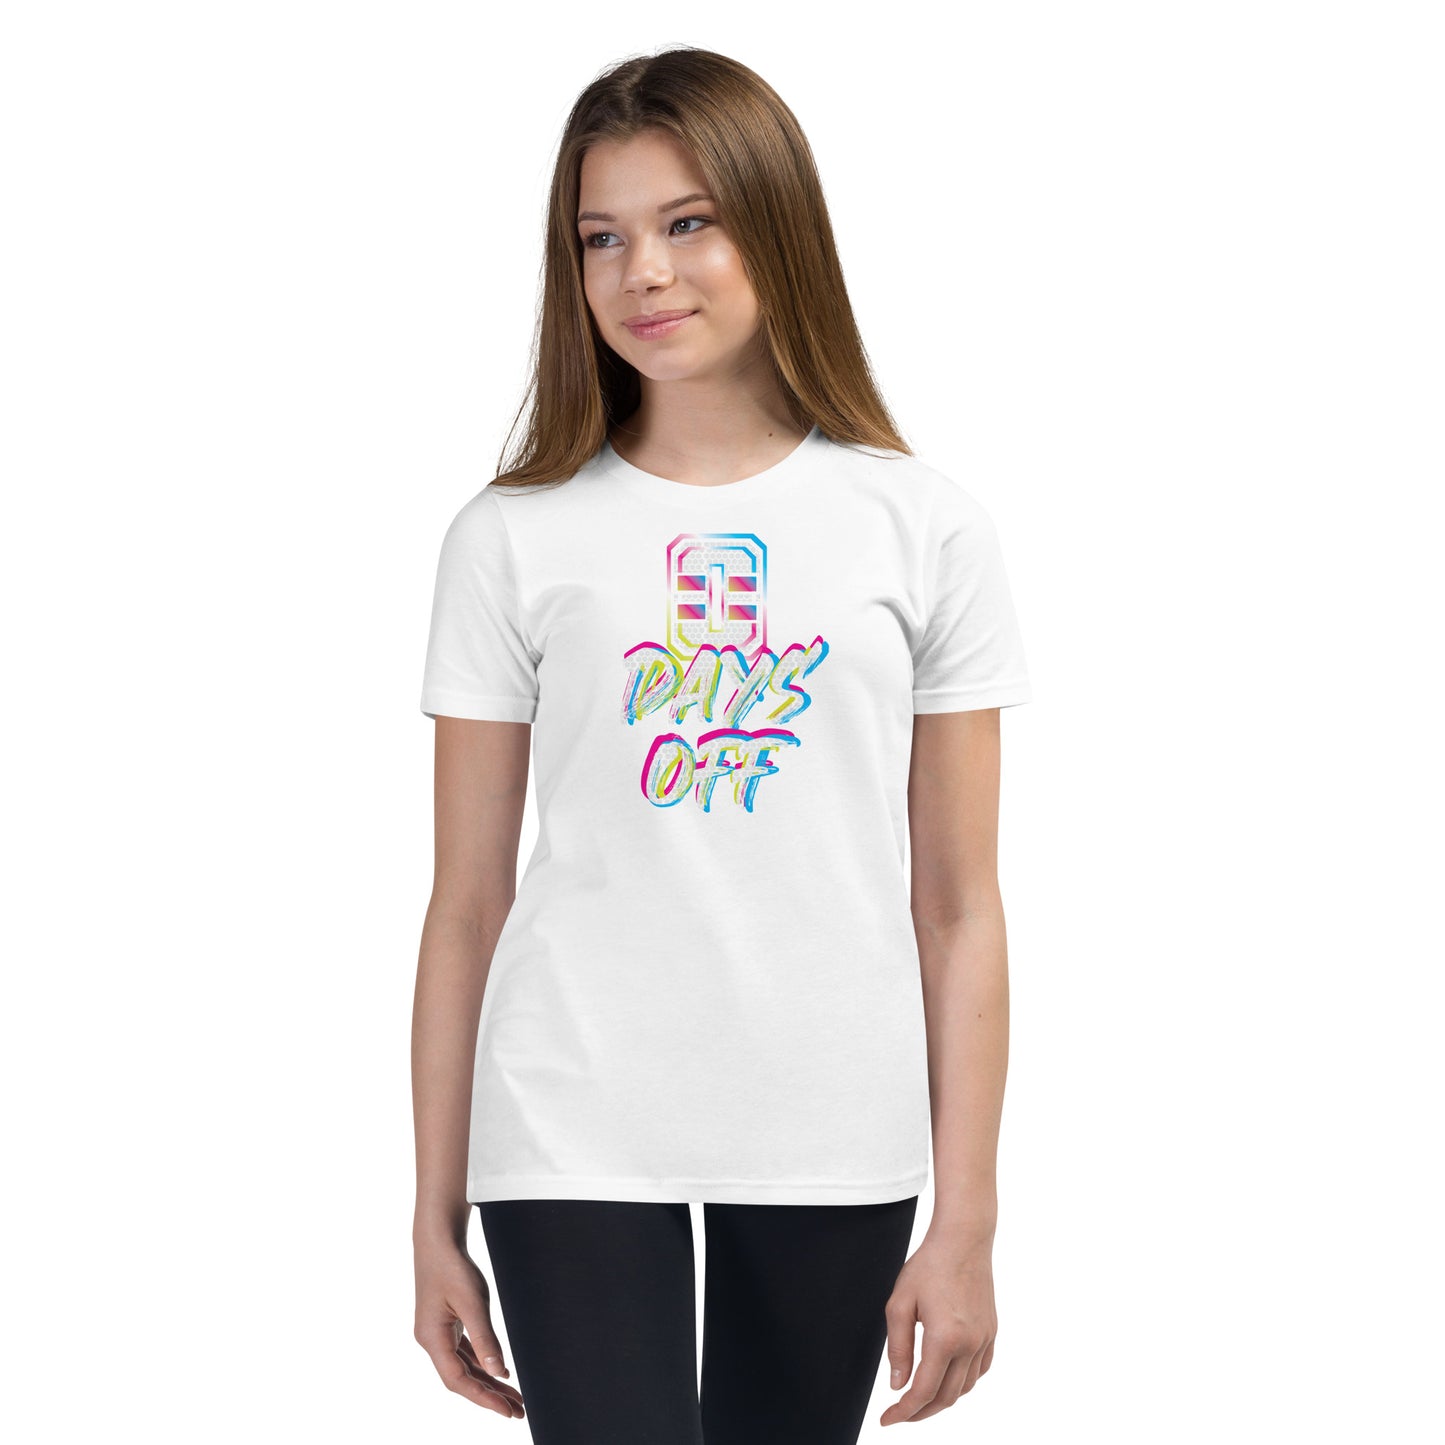 OM Hype 0 Days Off Youth Short Sleeve T-Shirt